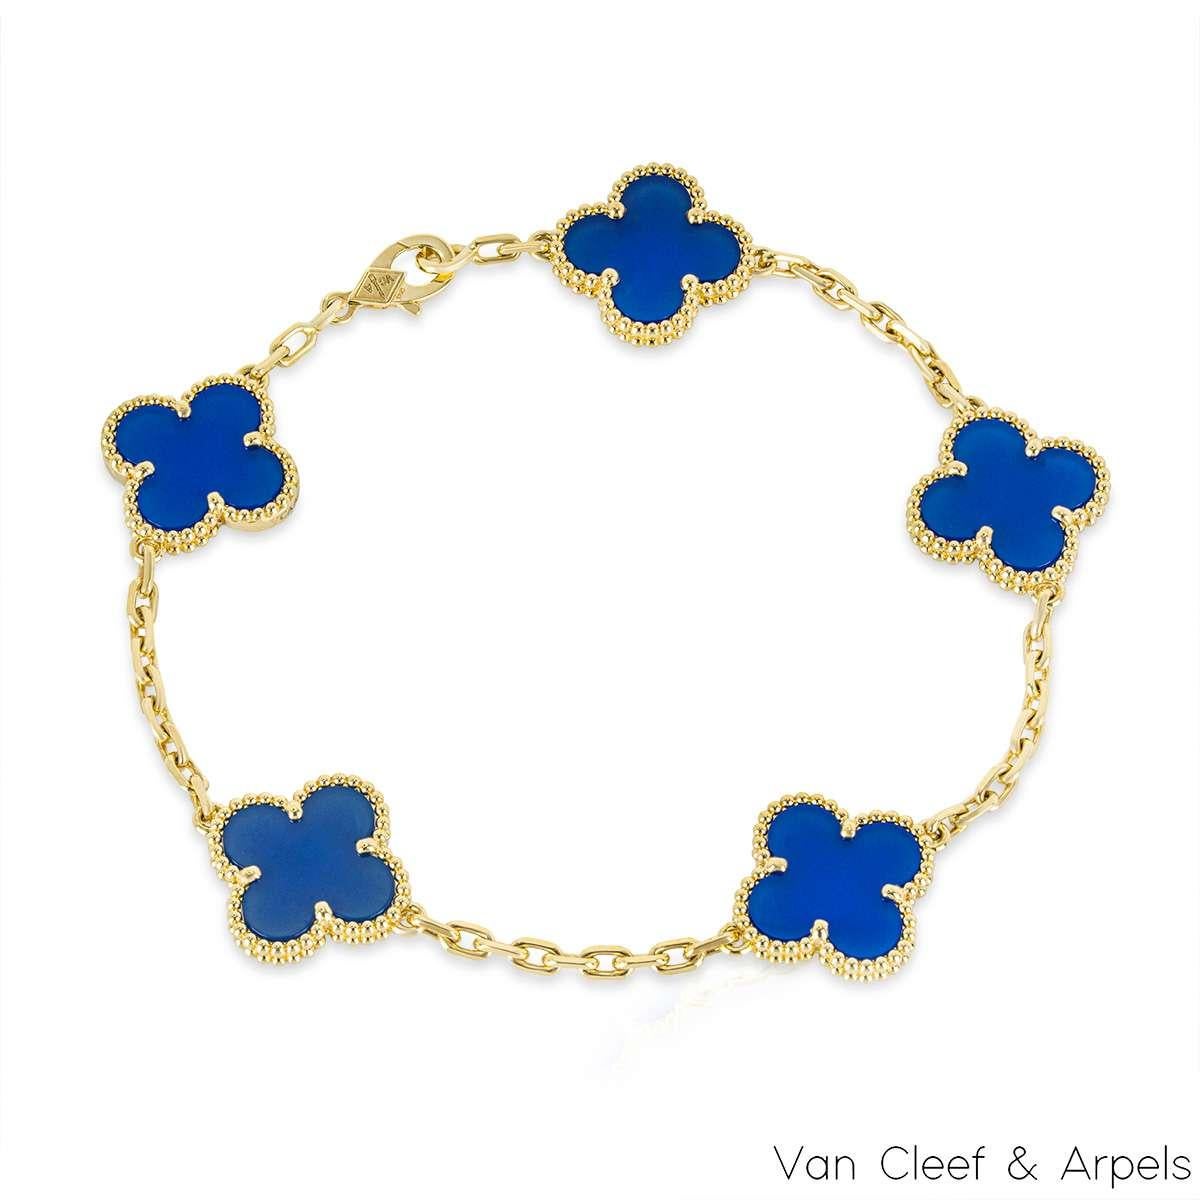 A gorgeous 18k yellow gold blue agate bracelet from the Vintage Alhambra collection by Van Cleef and Arpels. The bracelet is made up of 5 iconic clover motifs, each set with a beaded edge and a blue agate inlay, set throughout the length of the